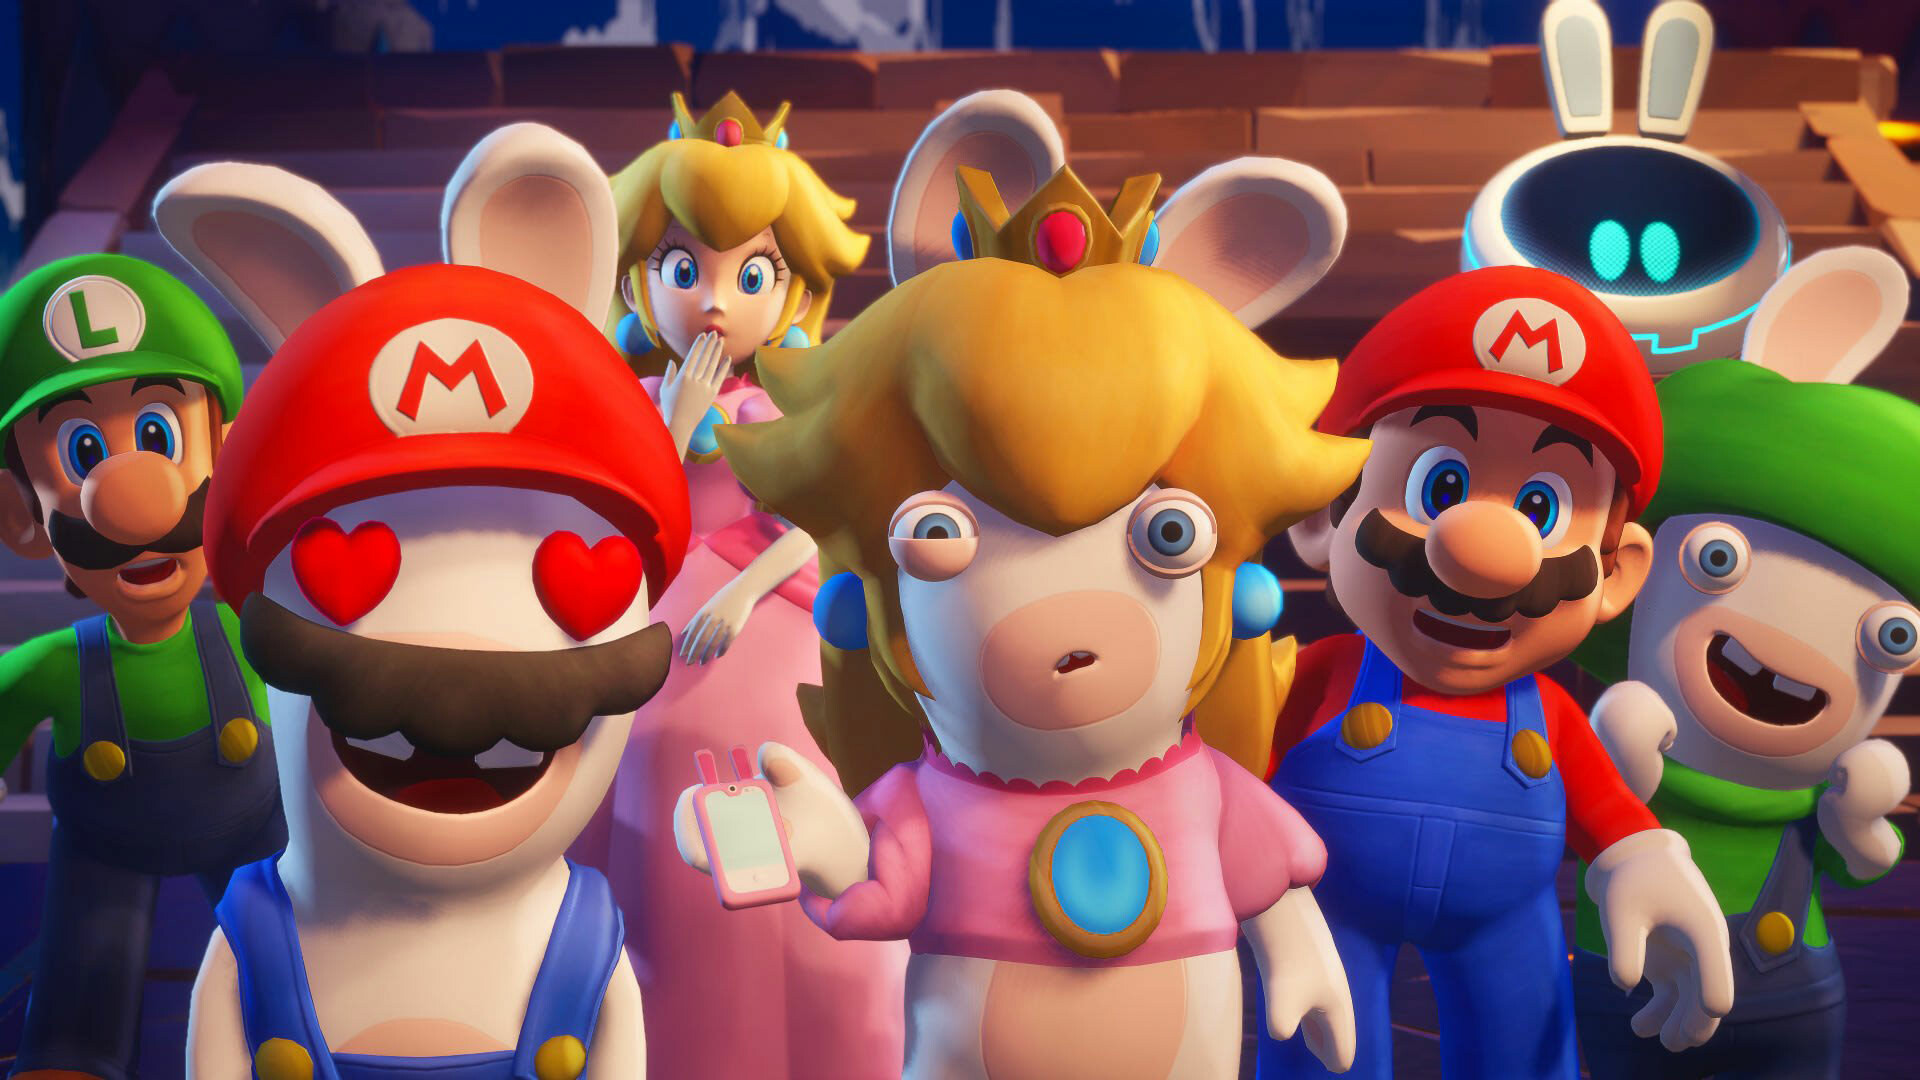 Free Mario + Rabbids, Sparks of Hope, Energetic characters, Vibrant world, 1920x1080 Full HD Desktop